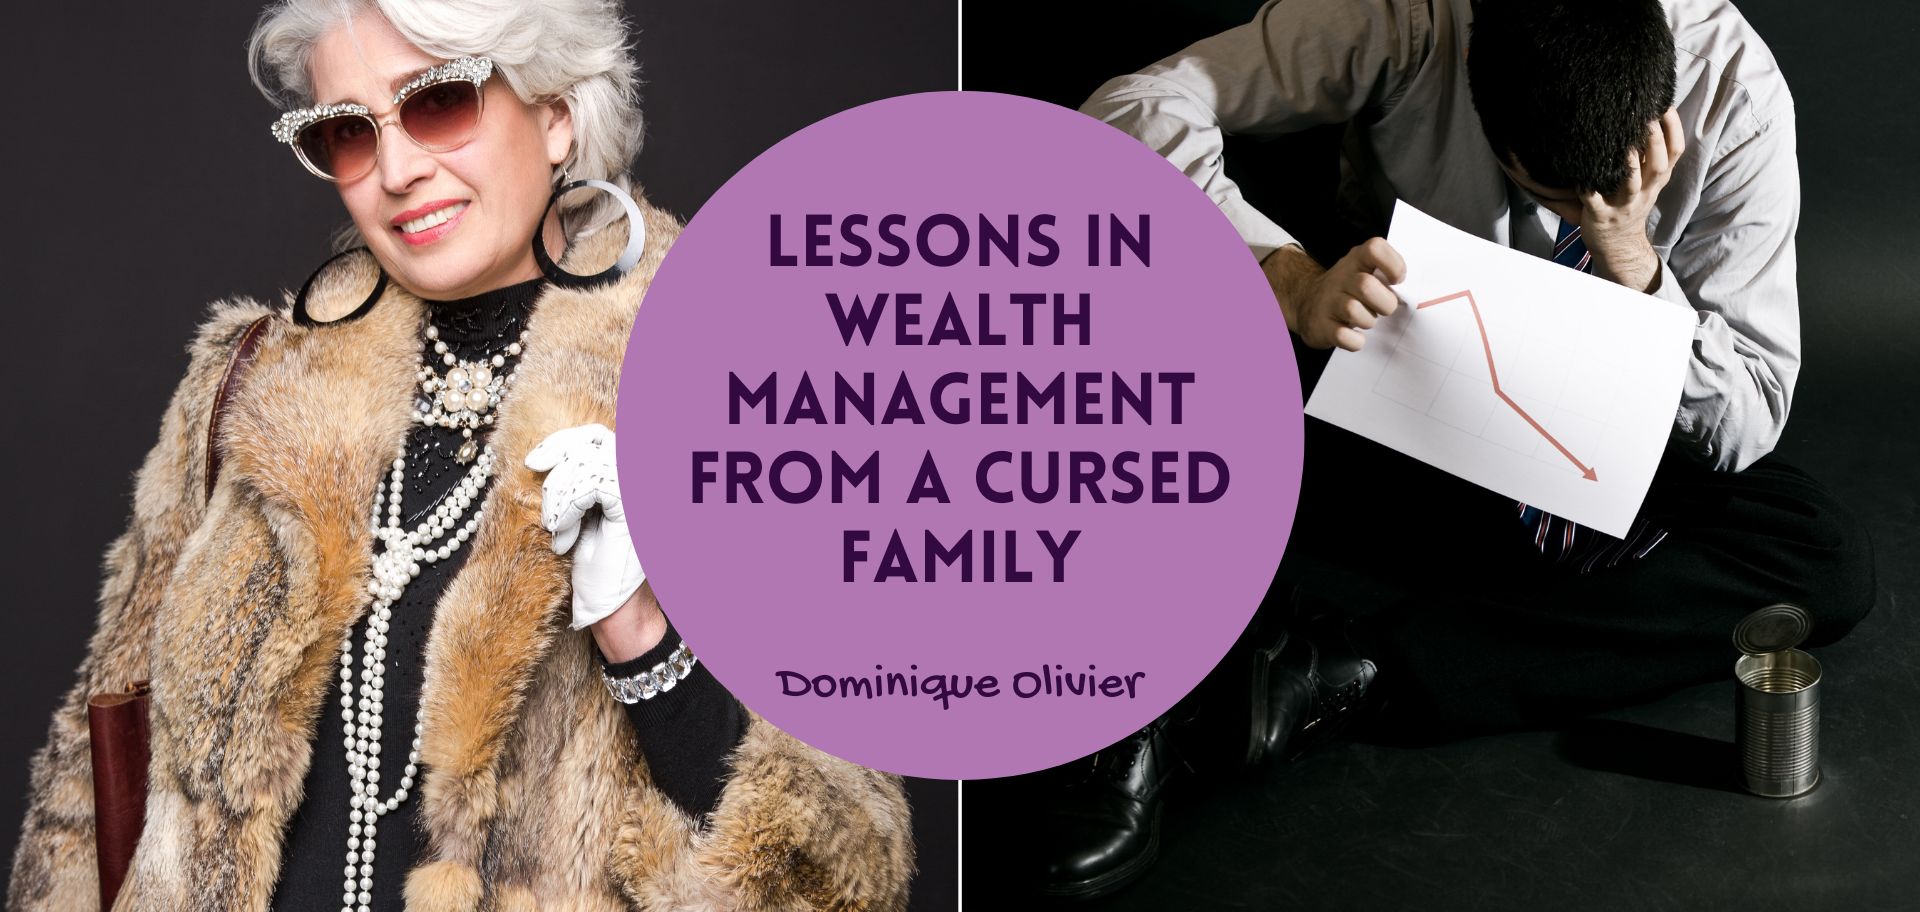 Lessons in wealth management from a cursed family